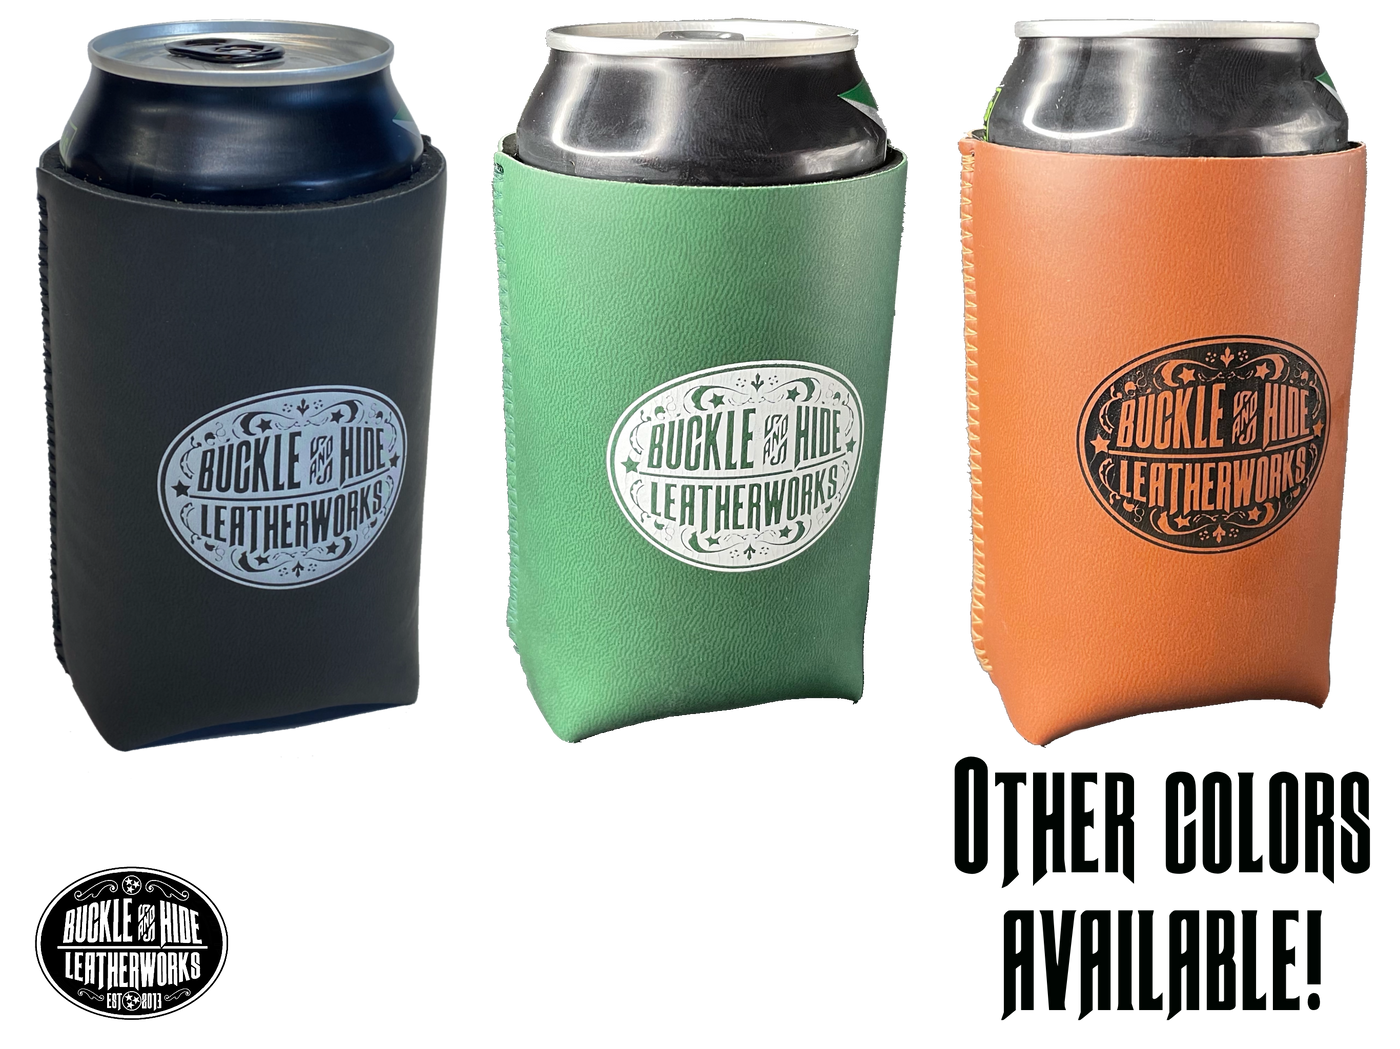 Great for soda, and your favorite canned beverages, our Buckle and Hide leather like neoprene koozies will keep your hands warm and dry while your drinks maintain a cold temperature. Made with the well-known wetsuit material, these can coolers feature 3mm walls, fit up to 12 oz. cans, sewn together for a secure hold, completely foldable and collapsible,  A favorite among our customers! Choose from Black, Green, or Tan. 